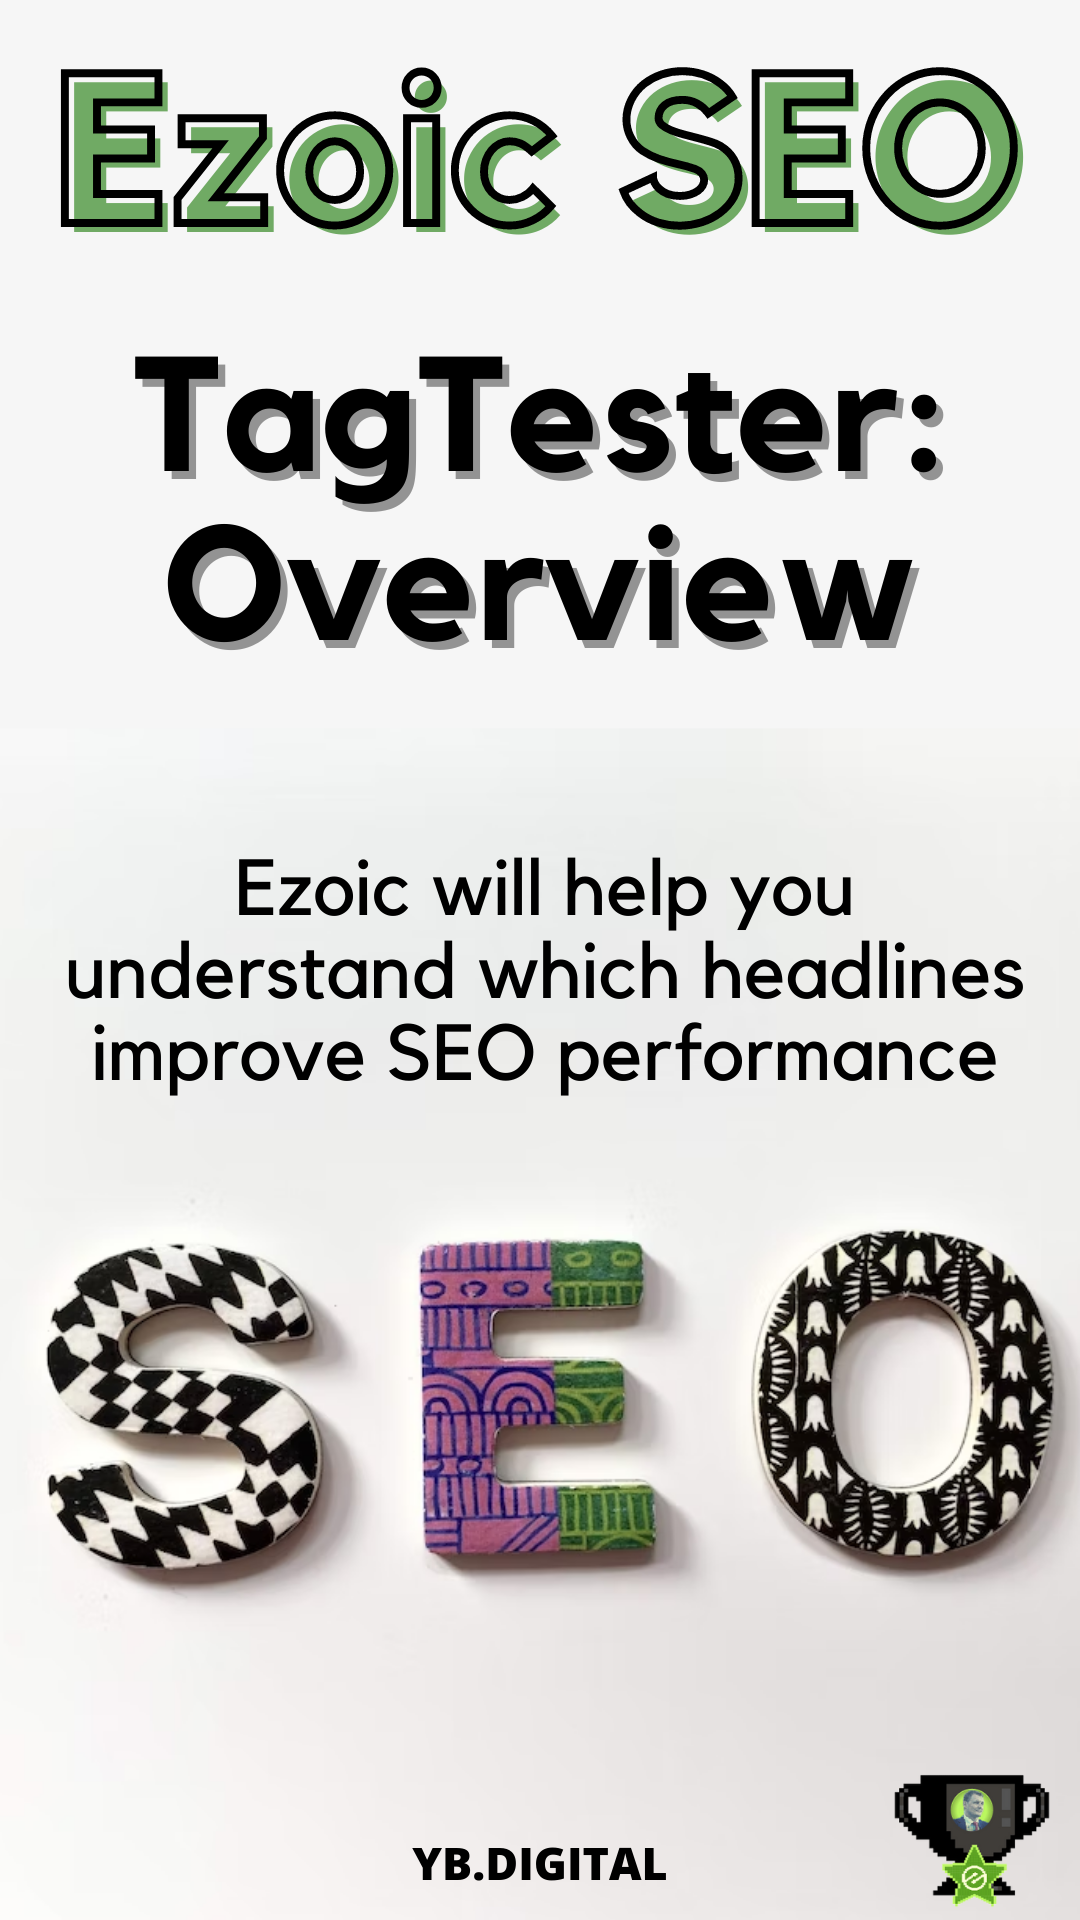 Ezoic SEO TagTester was invented by the developers so that users can optimize the titles of their sites. Ezoic will help you understand which headlines improve SEO performance. This is necessary in order for the rating of the site to rise among other similar ones.